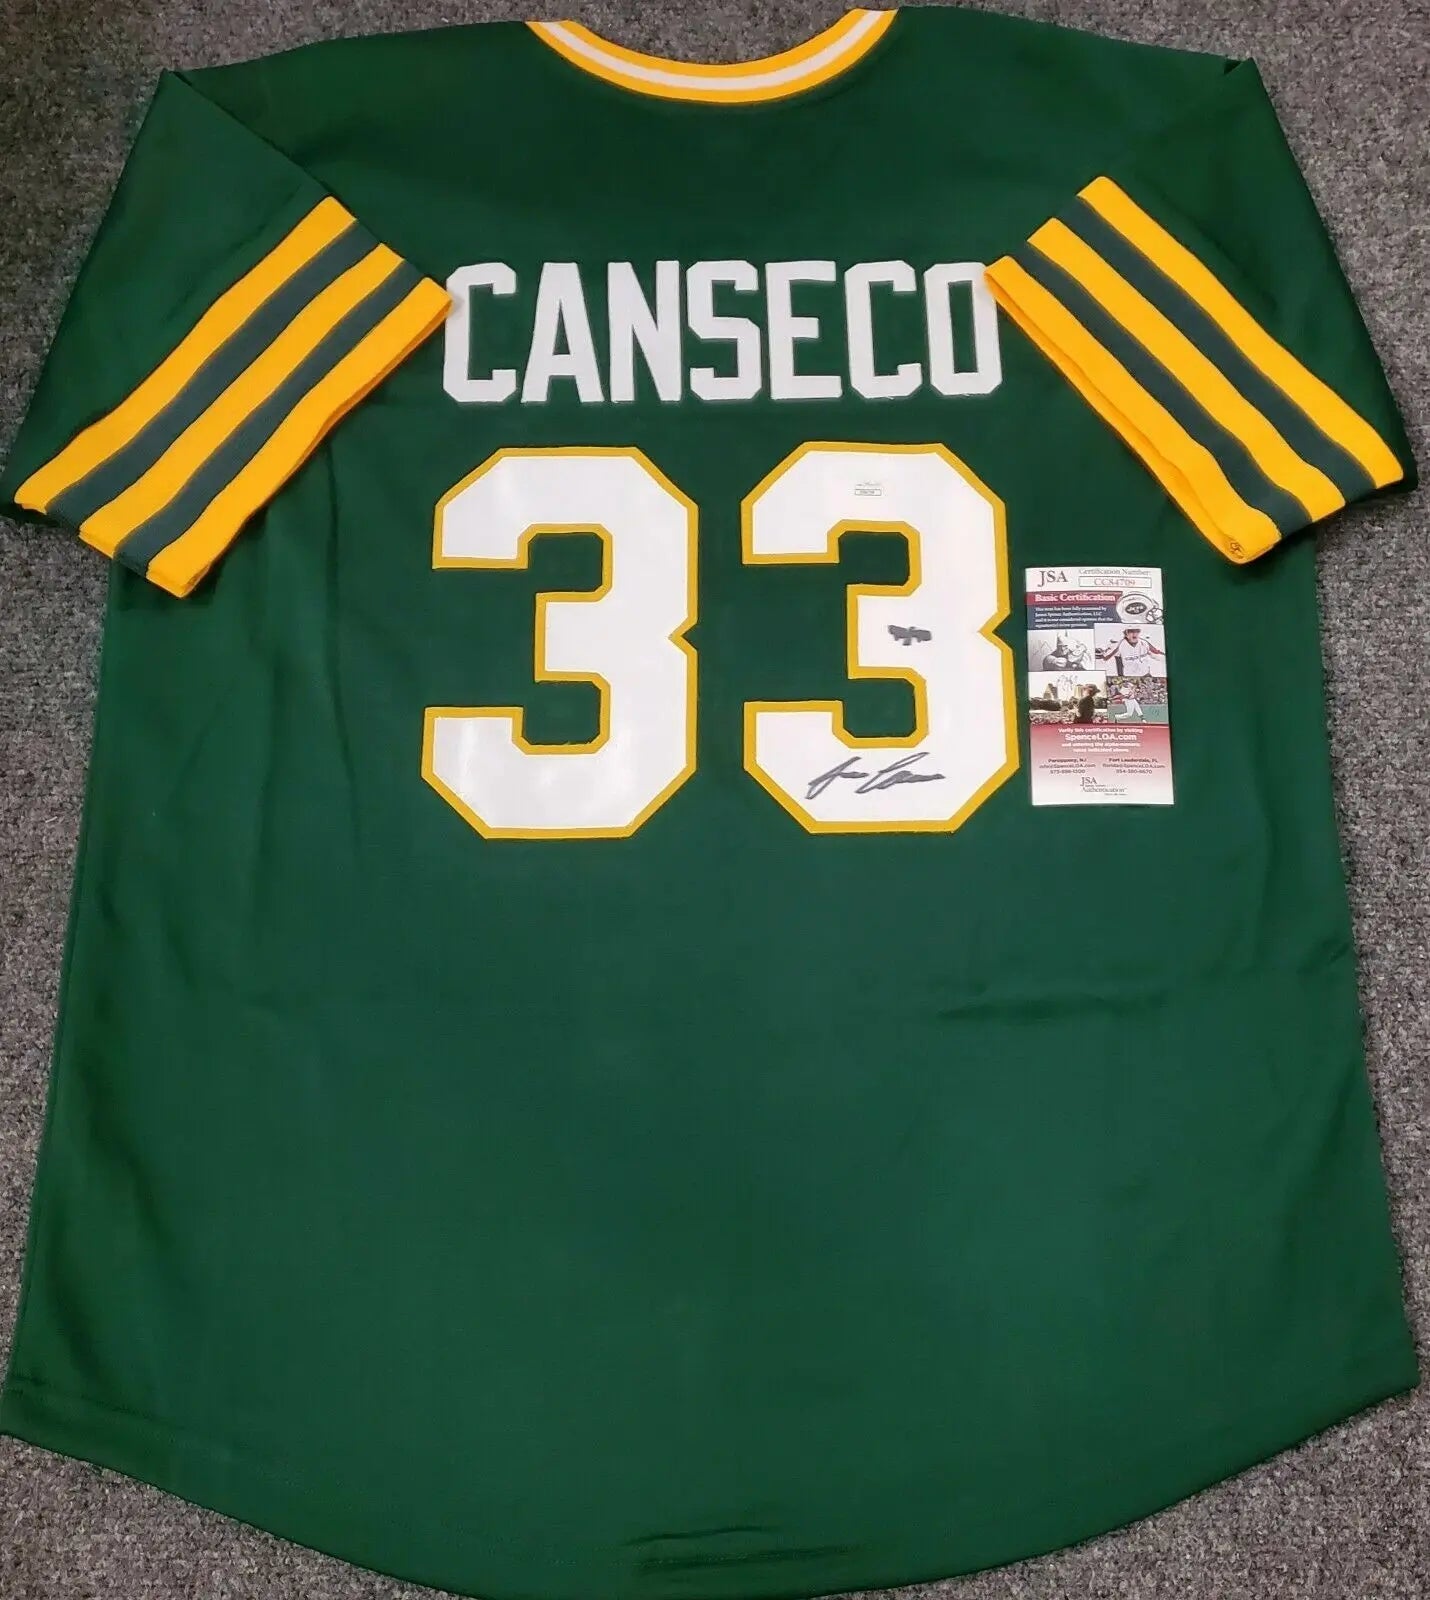 Jose Canseco Signed Jersey (Gameday)